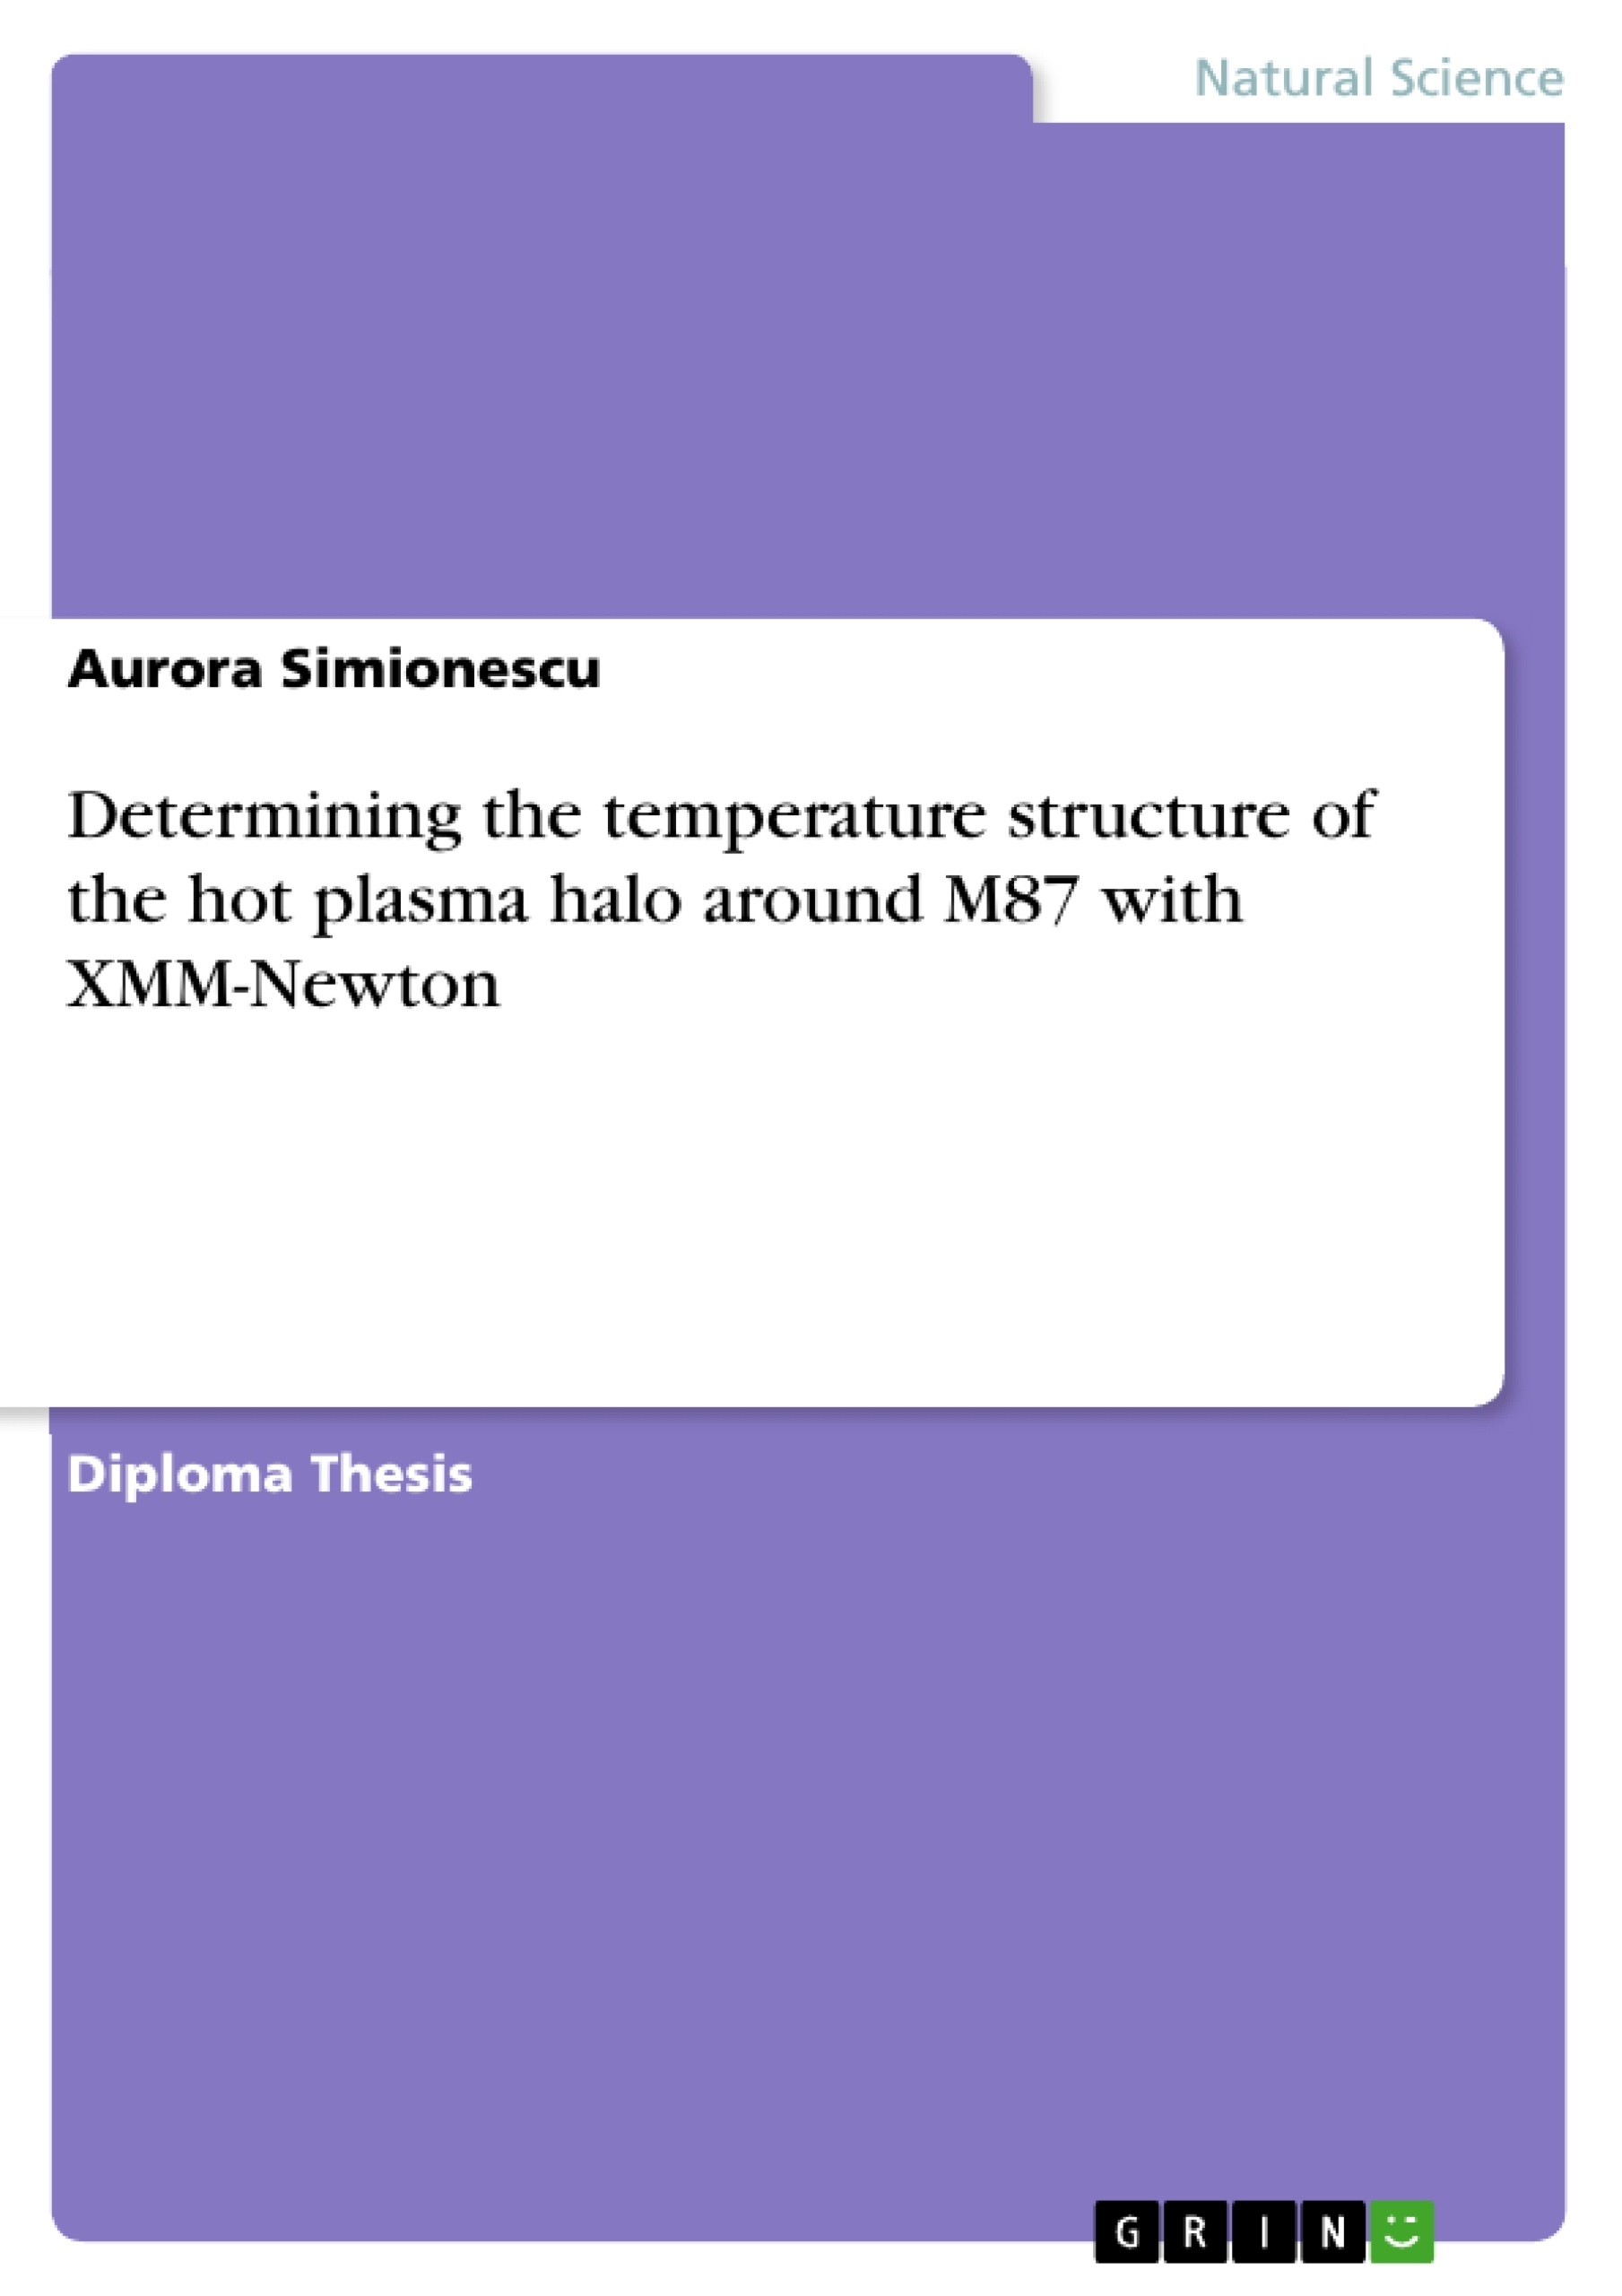 Titel: Determining the temperature structure of the hot plasma halo around M87 with XMM-Newton